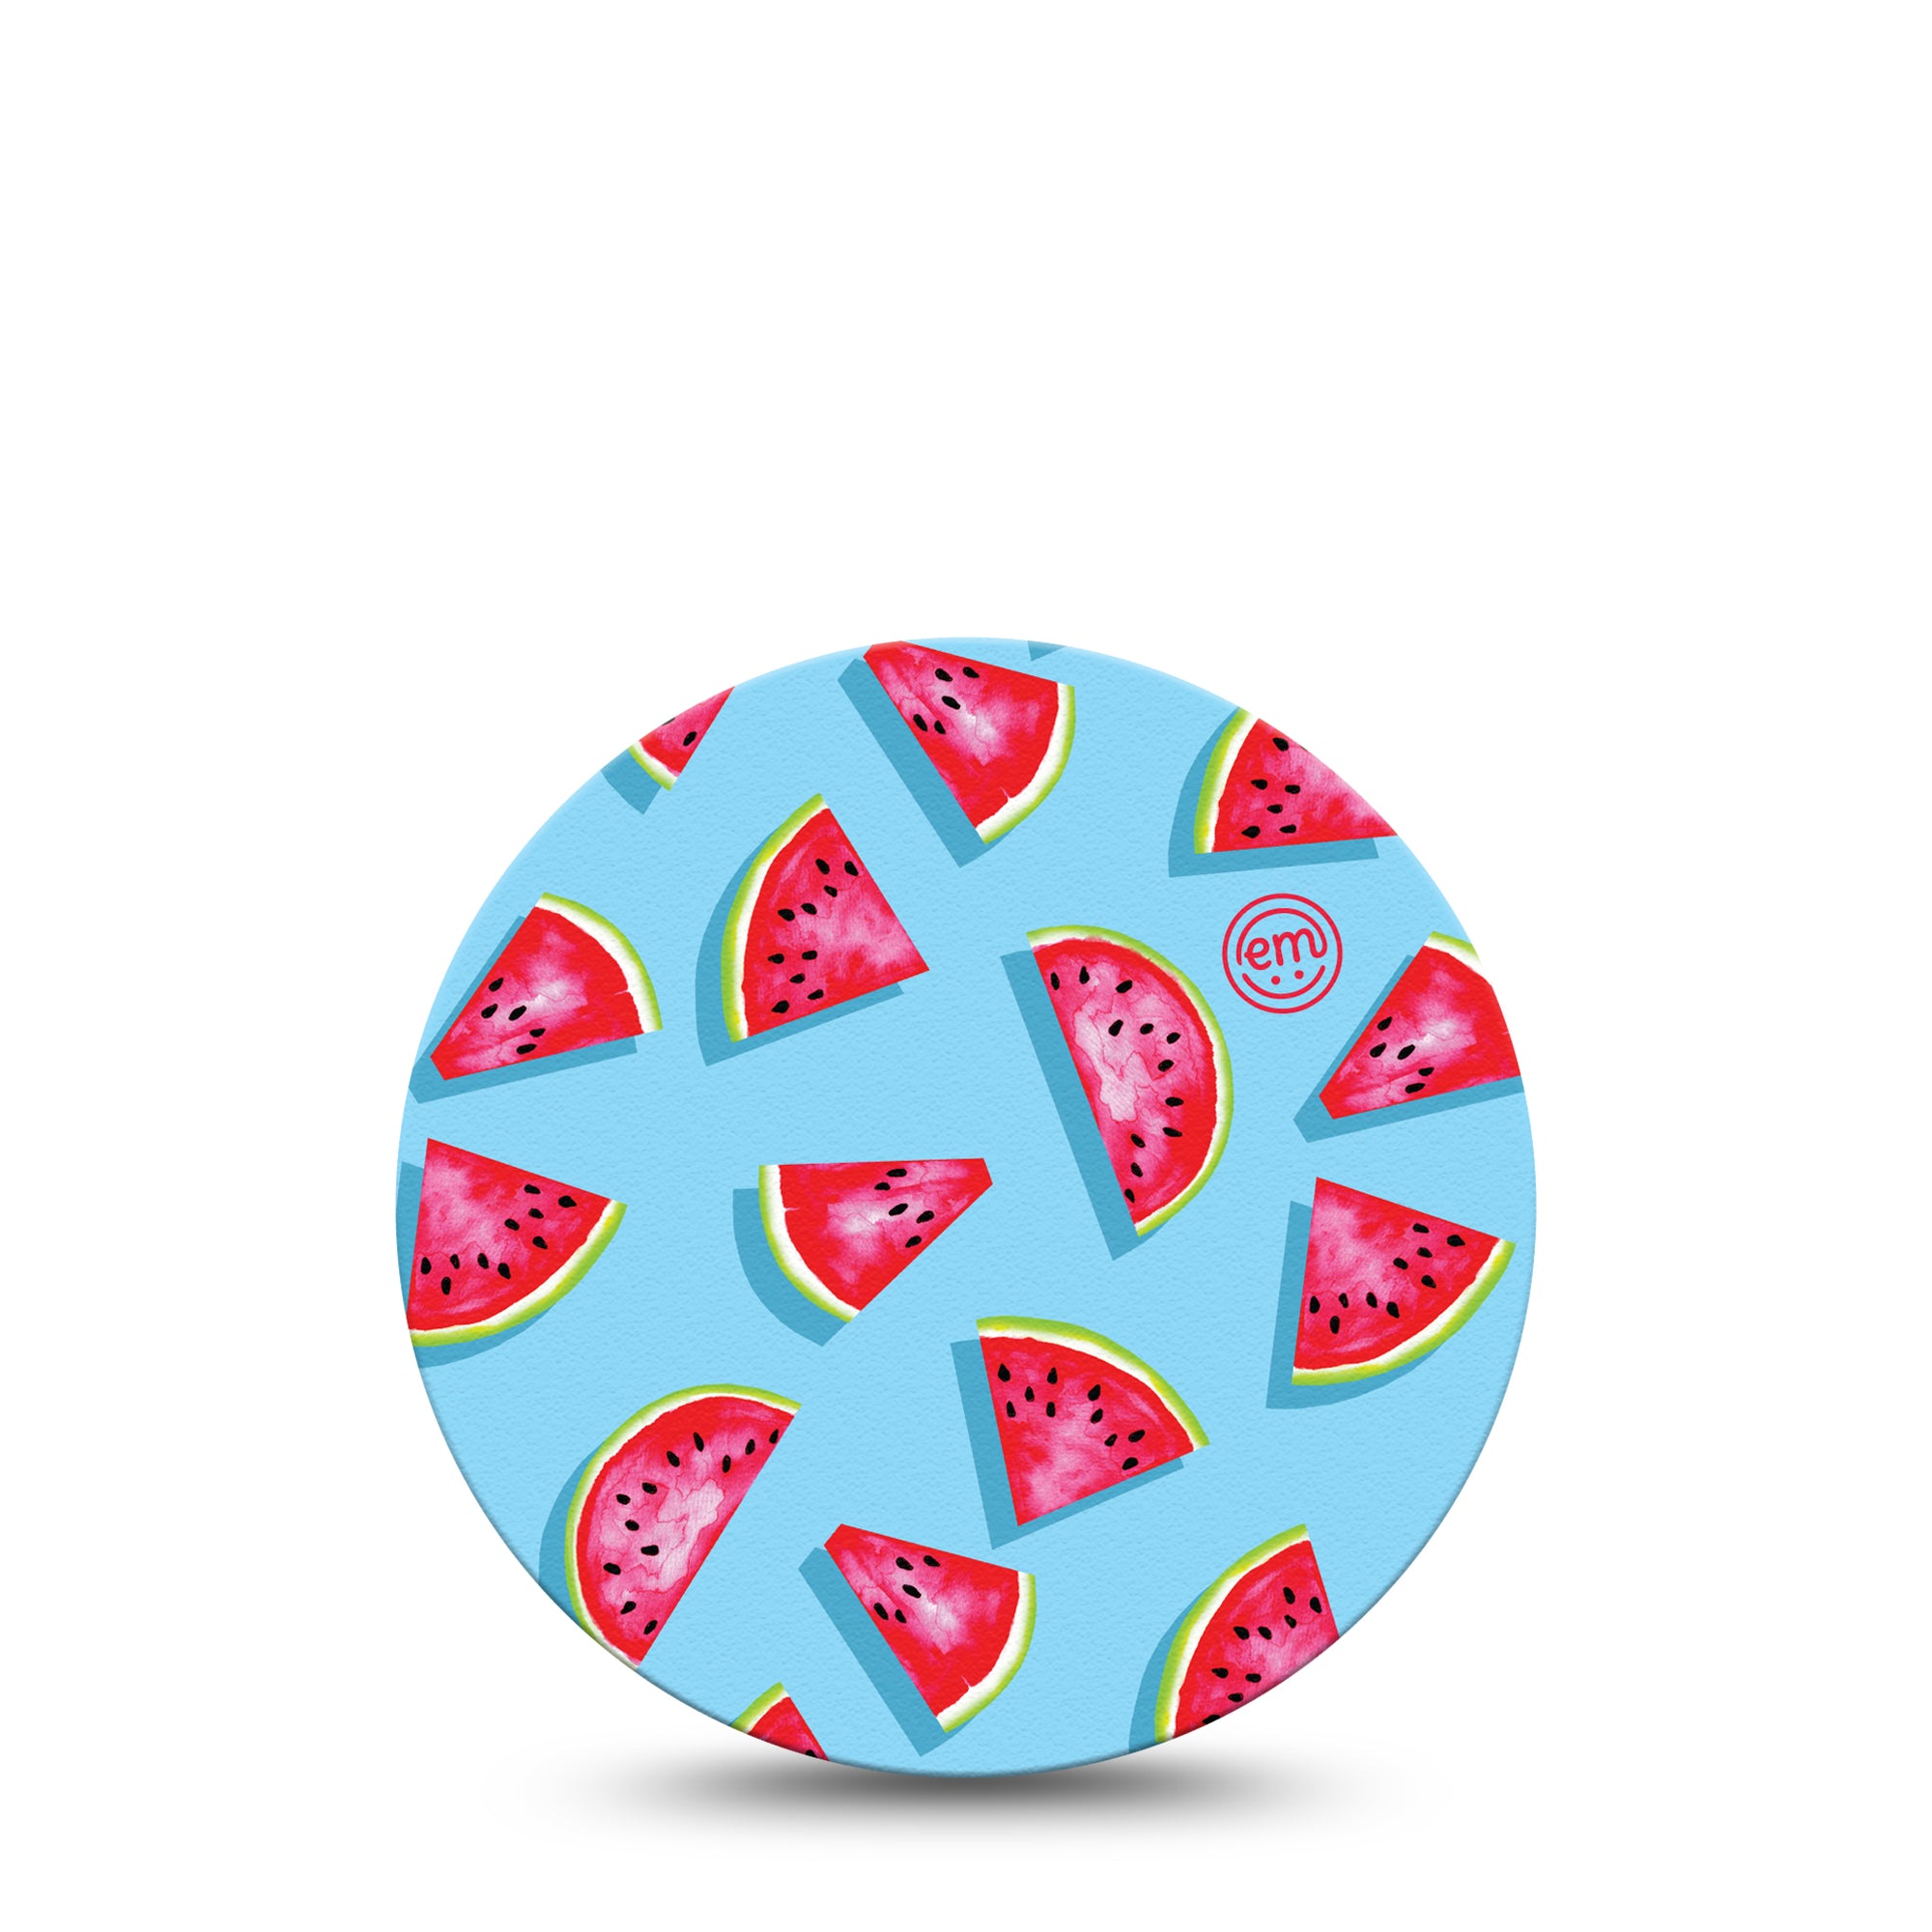 ExpressionMed Watermelon Slices Libre Overpatch Tape